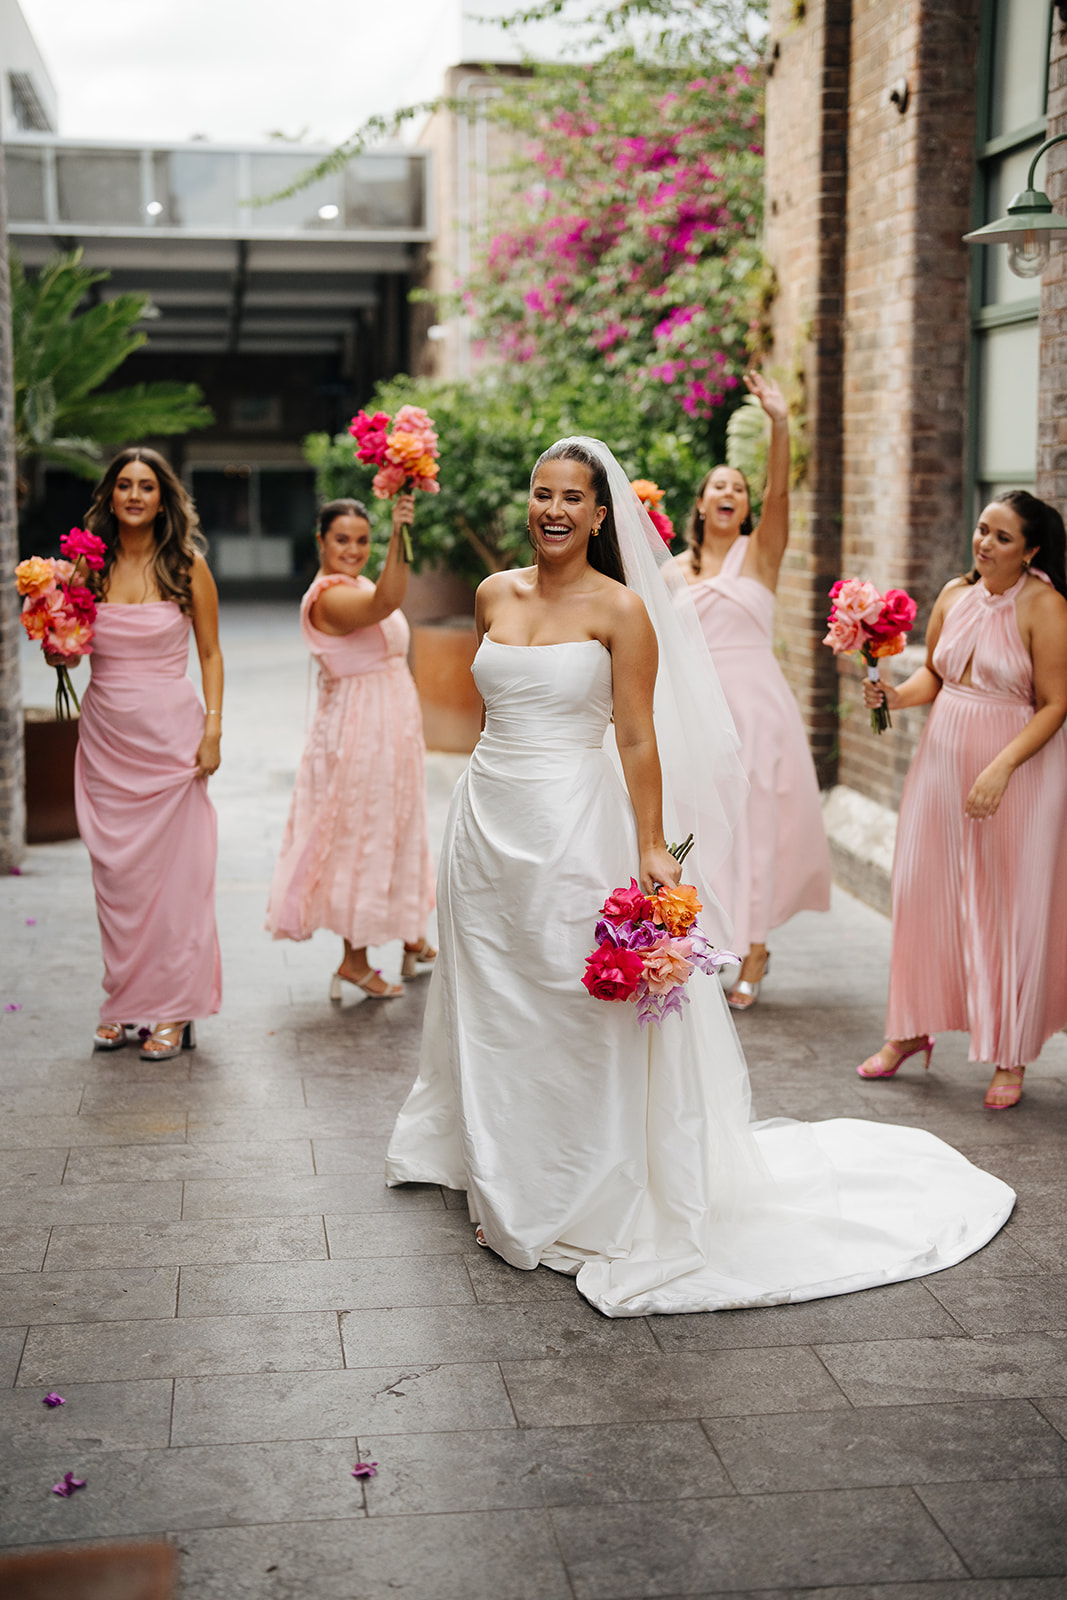 Karen Willis Holmes Real Bride Ariella is wearing the Emma Gown from the BESPOKE Collection. Ariella had her iconic wedding in The Grounds of Alexandria, Photographed by Hello Sweetheart Au.